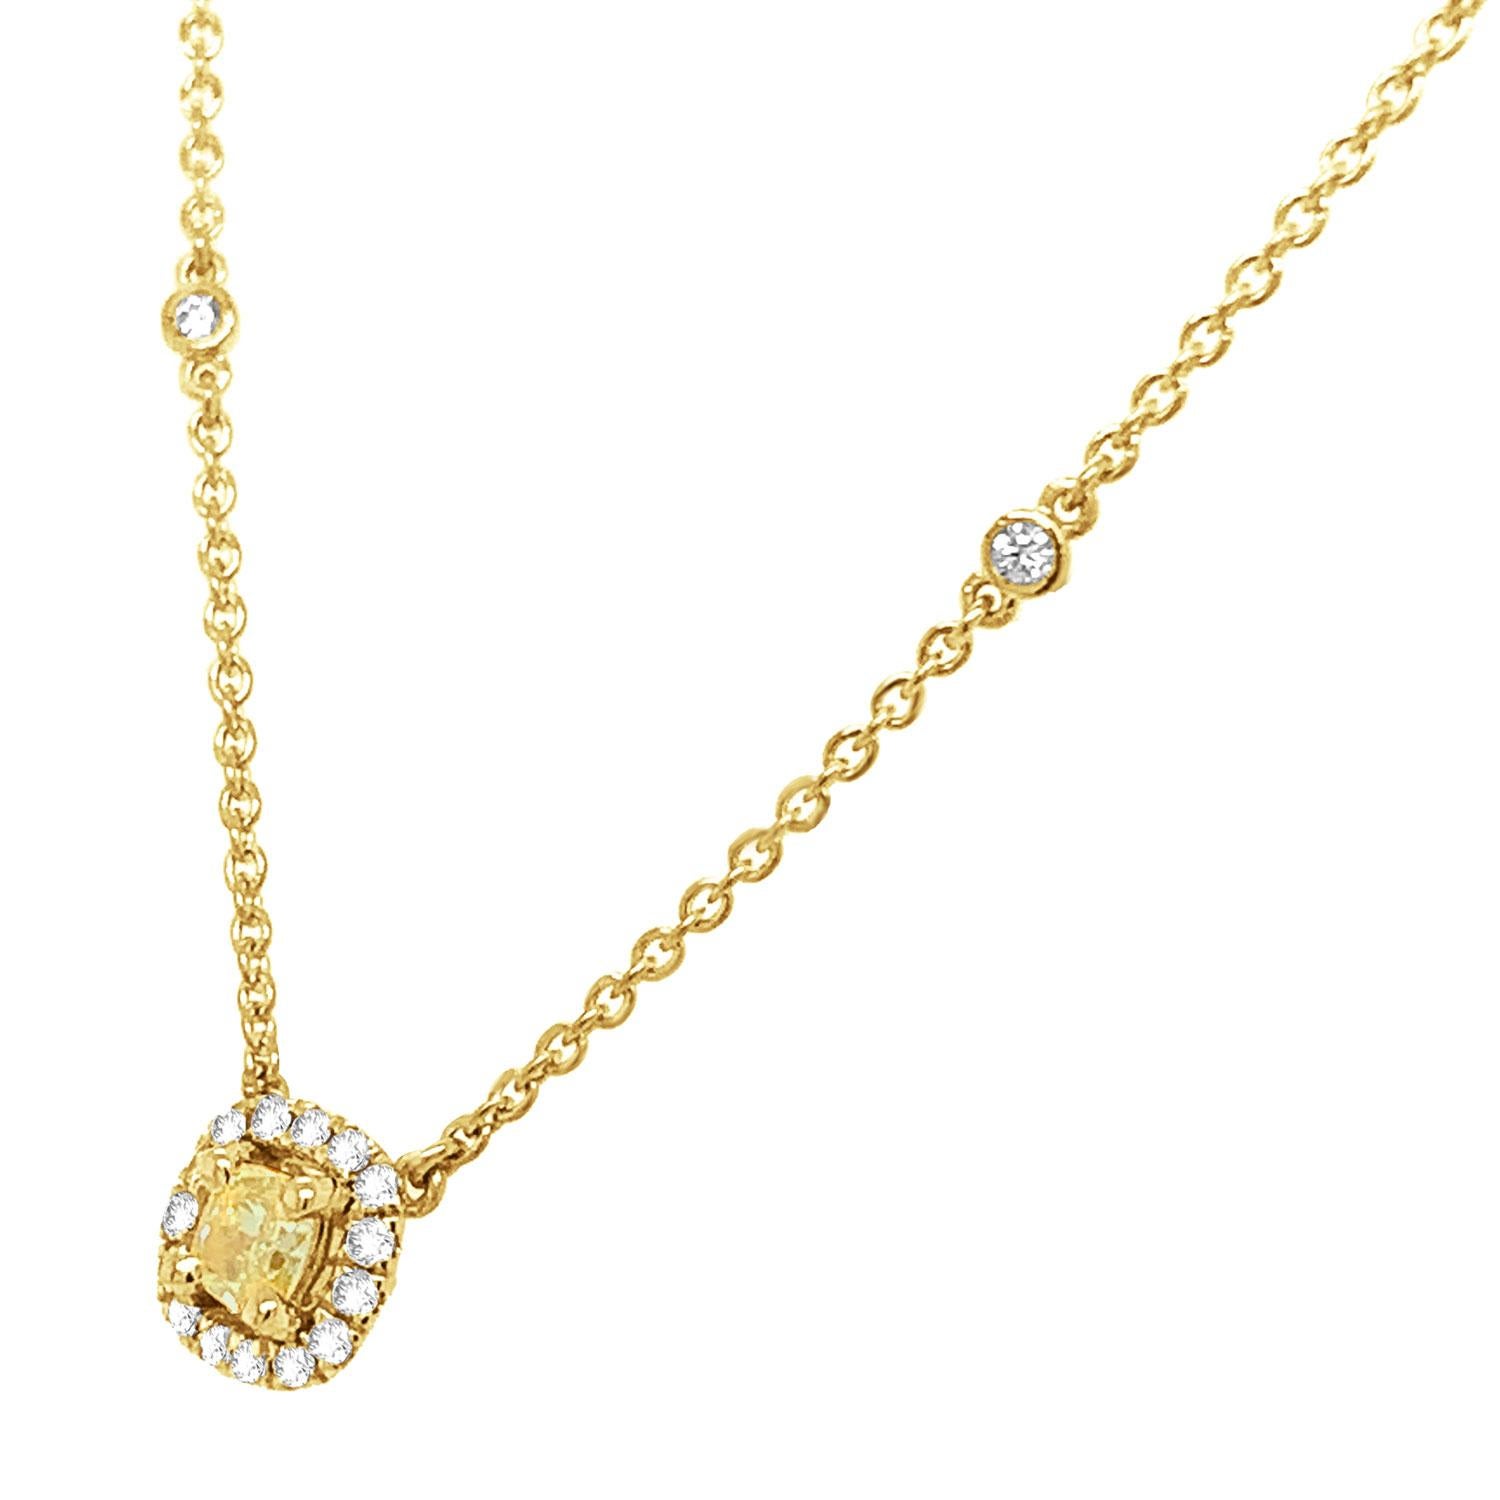 This stunning 18k yellow gold necklace features a 0.31 Carat Yellow Elongated cushion-shaped diamond encircled by one row of brilliant round diamonds on a 1 mm station chain containing sixteen (16) round brilliant diamonds bezel set.
The chain is 18